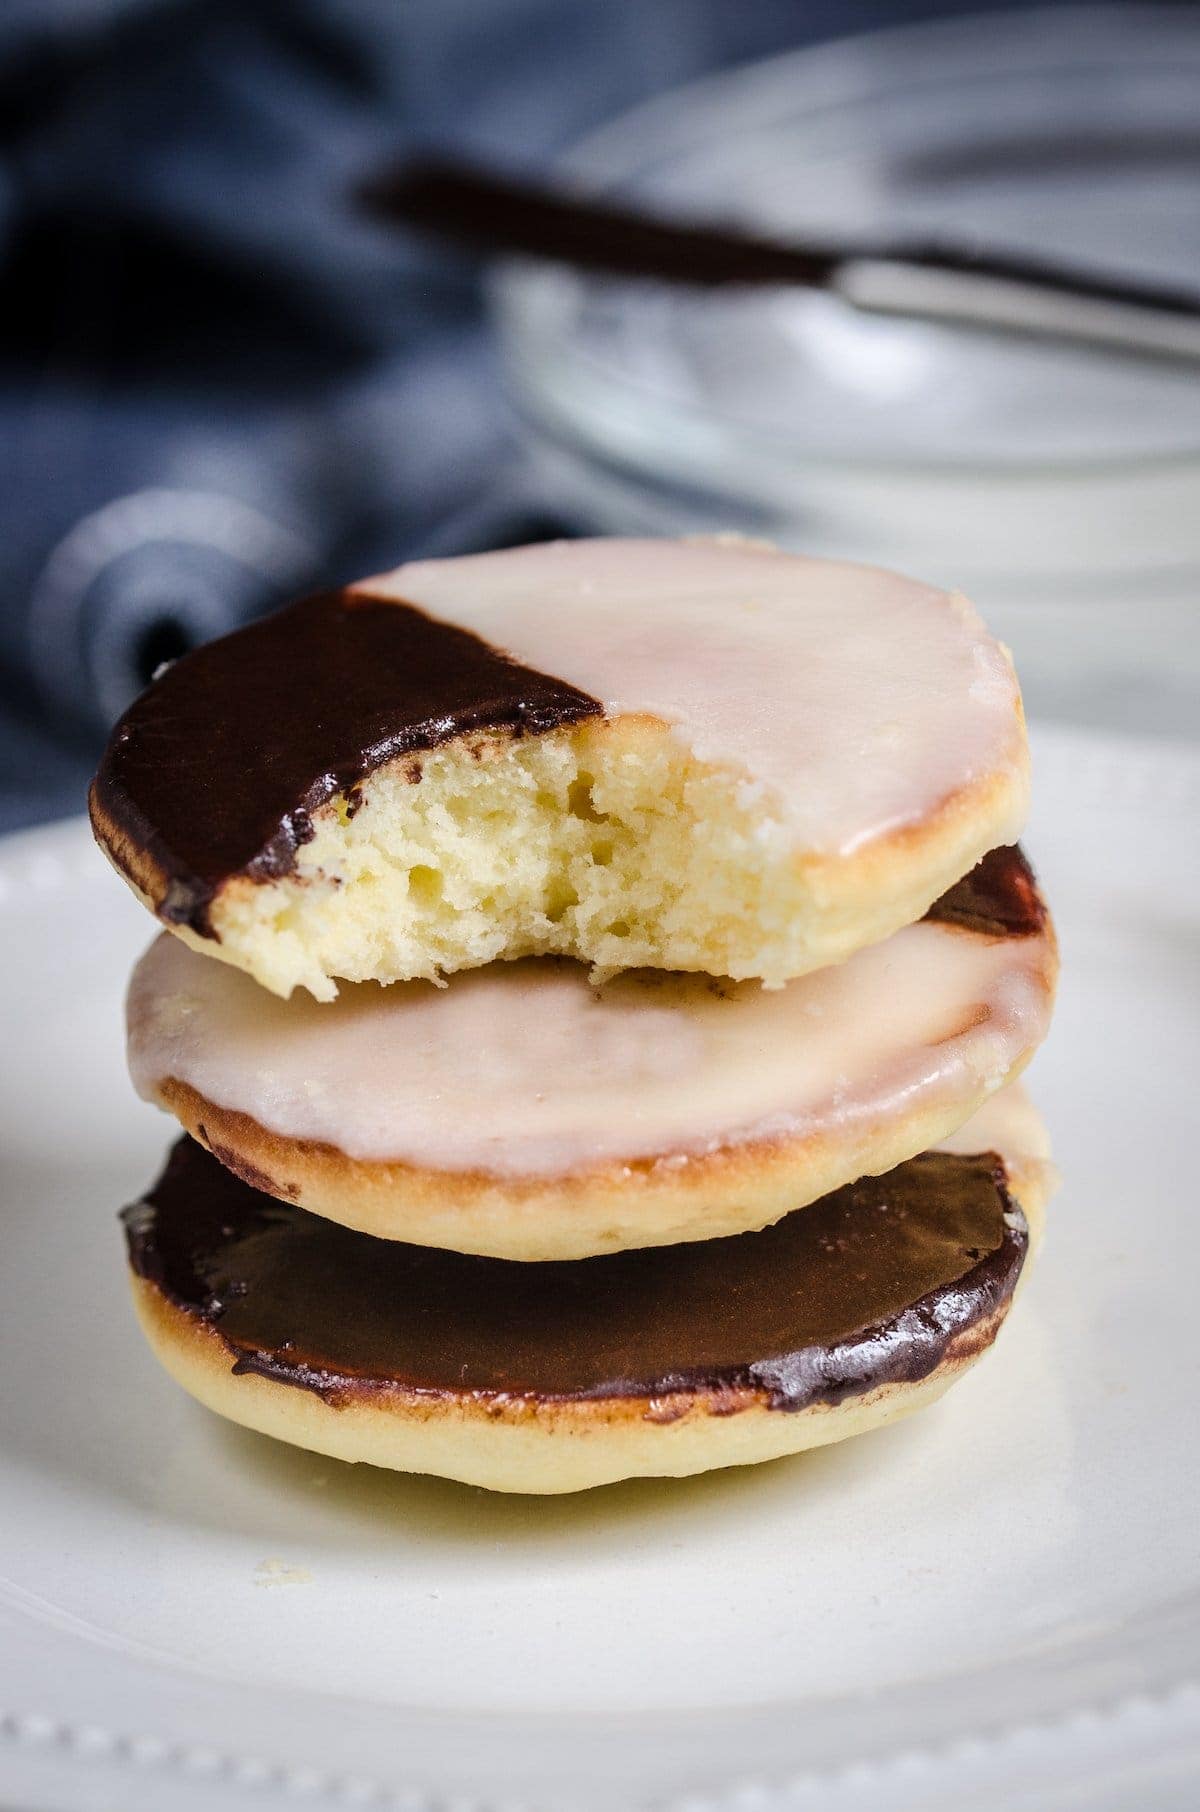 A stack of black and white cookies, with a bit missing from the top cookie.